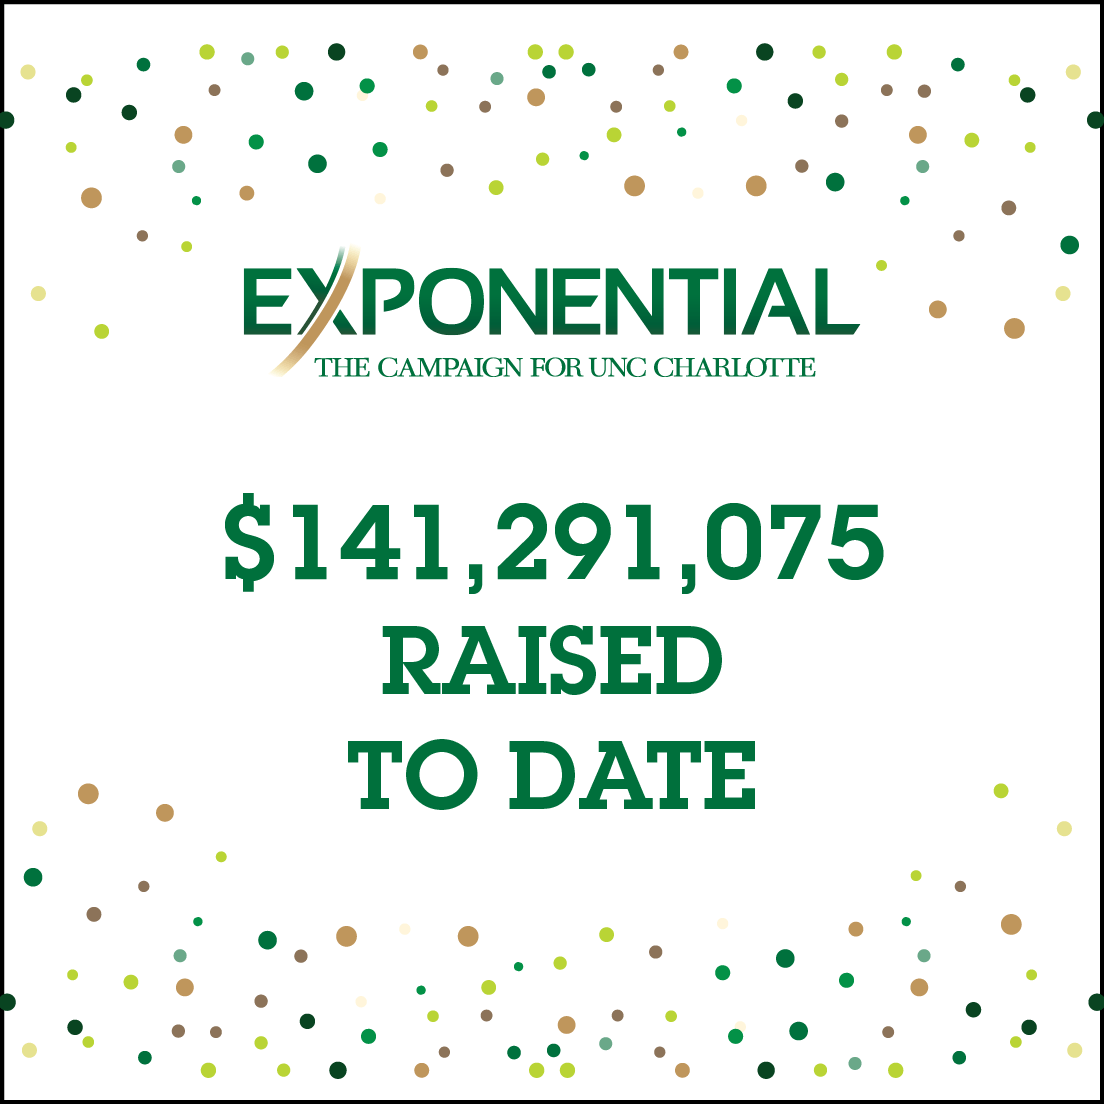 Exponential The Campaign for UNC Charlotte - $141,291,075 Raised to date